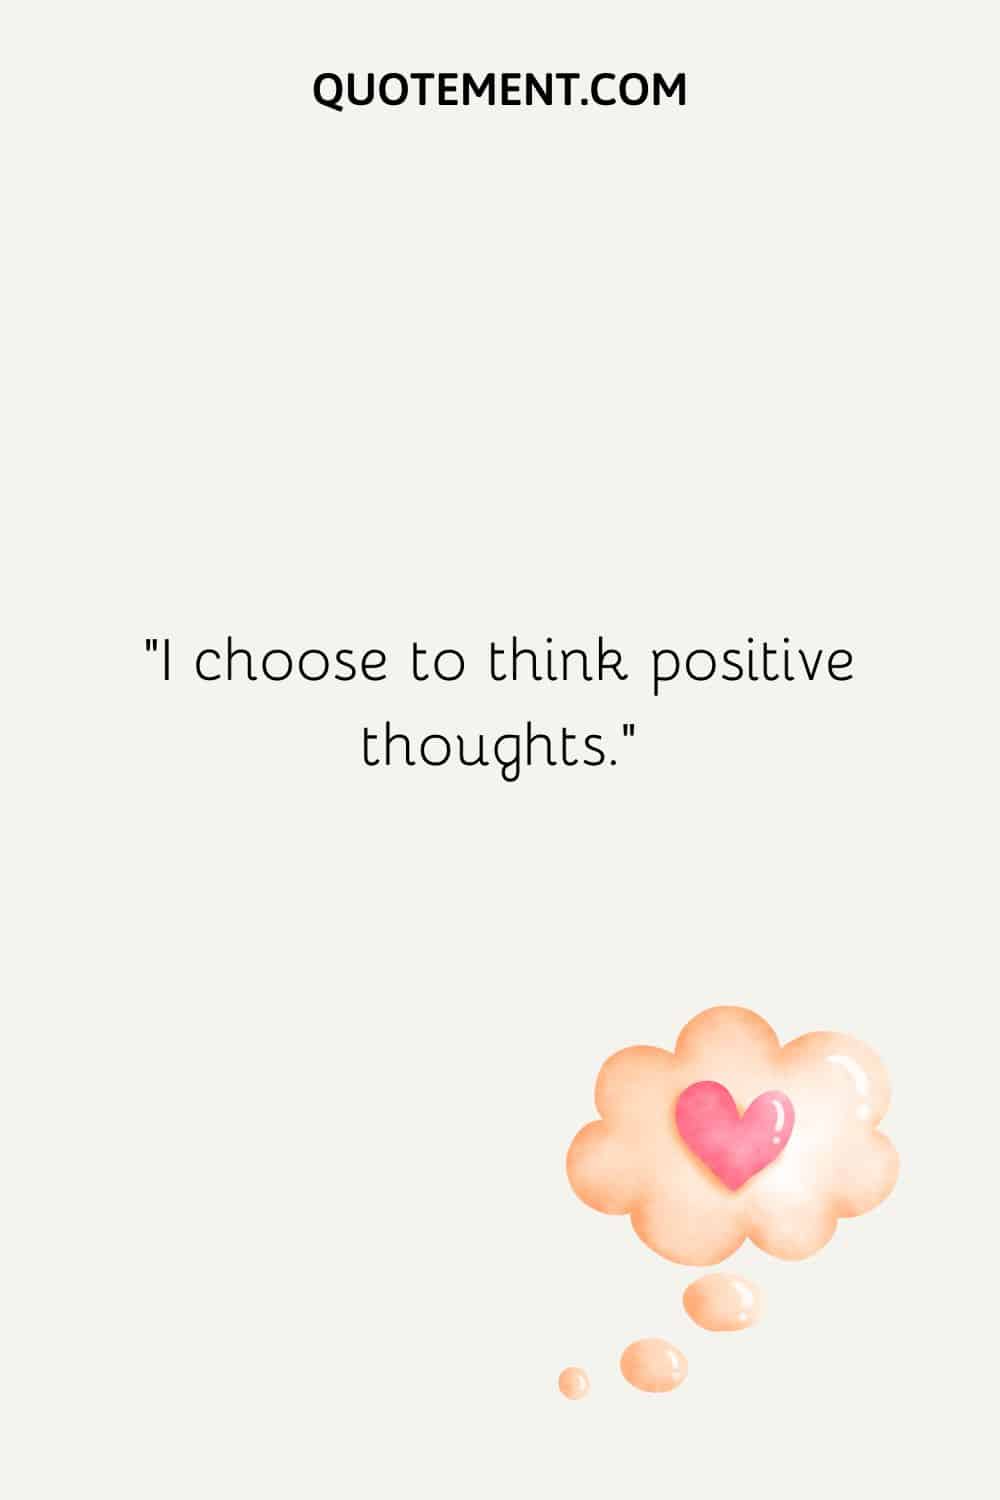 I choose to think positive thoughts